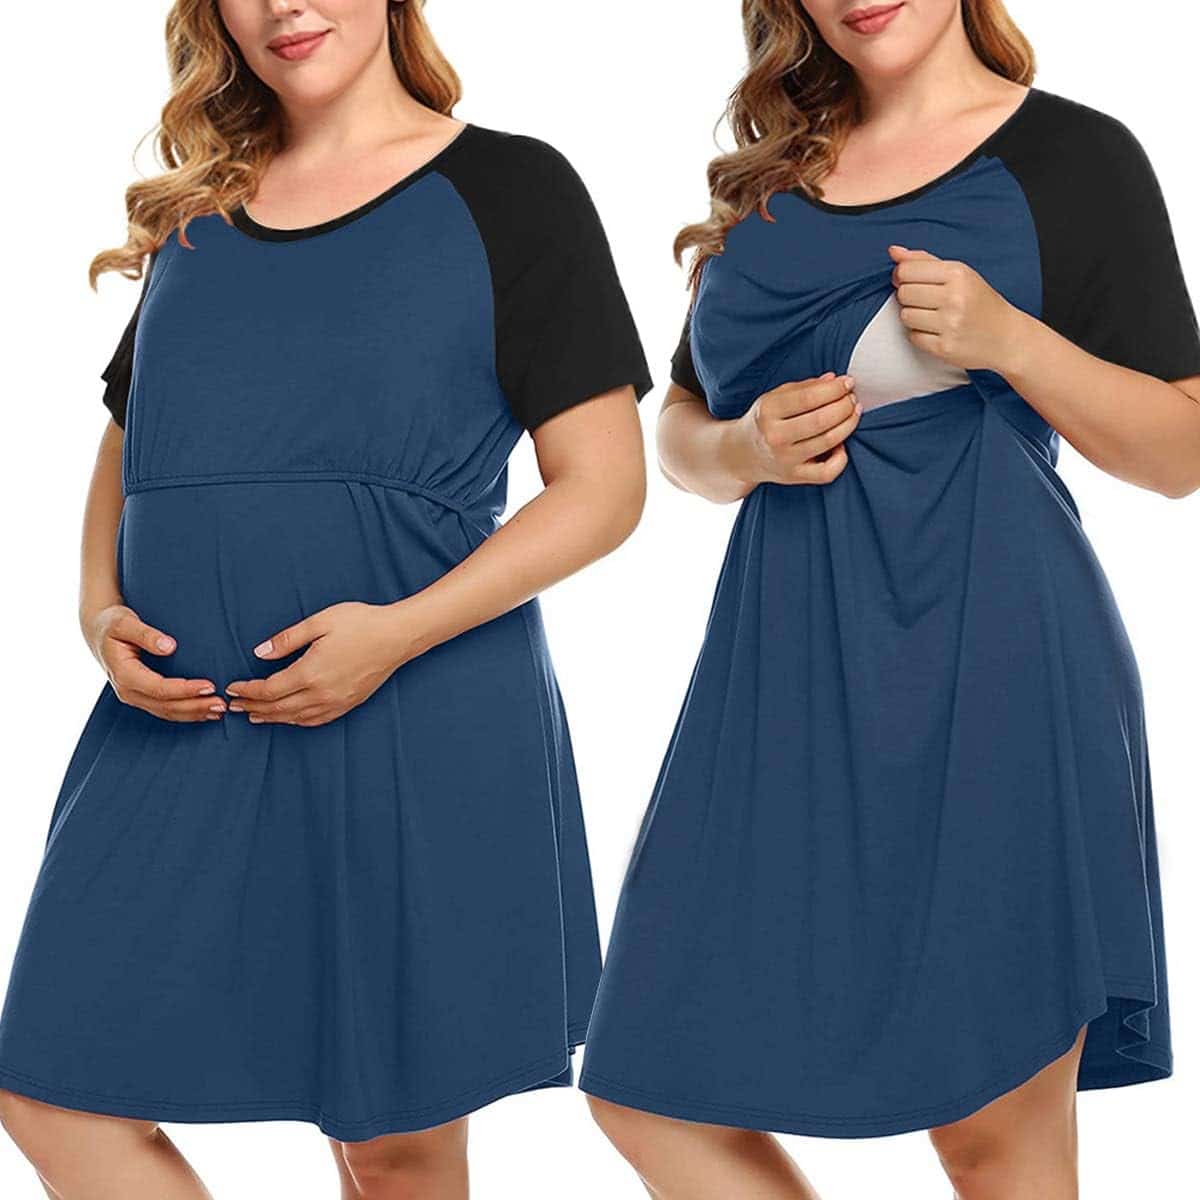 MONNURO Women’s Plus Size Labor and Delivery Gown: A Review of Comfort and Style